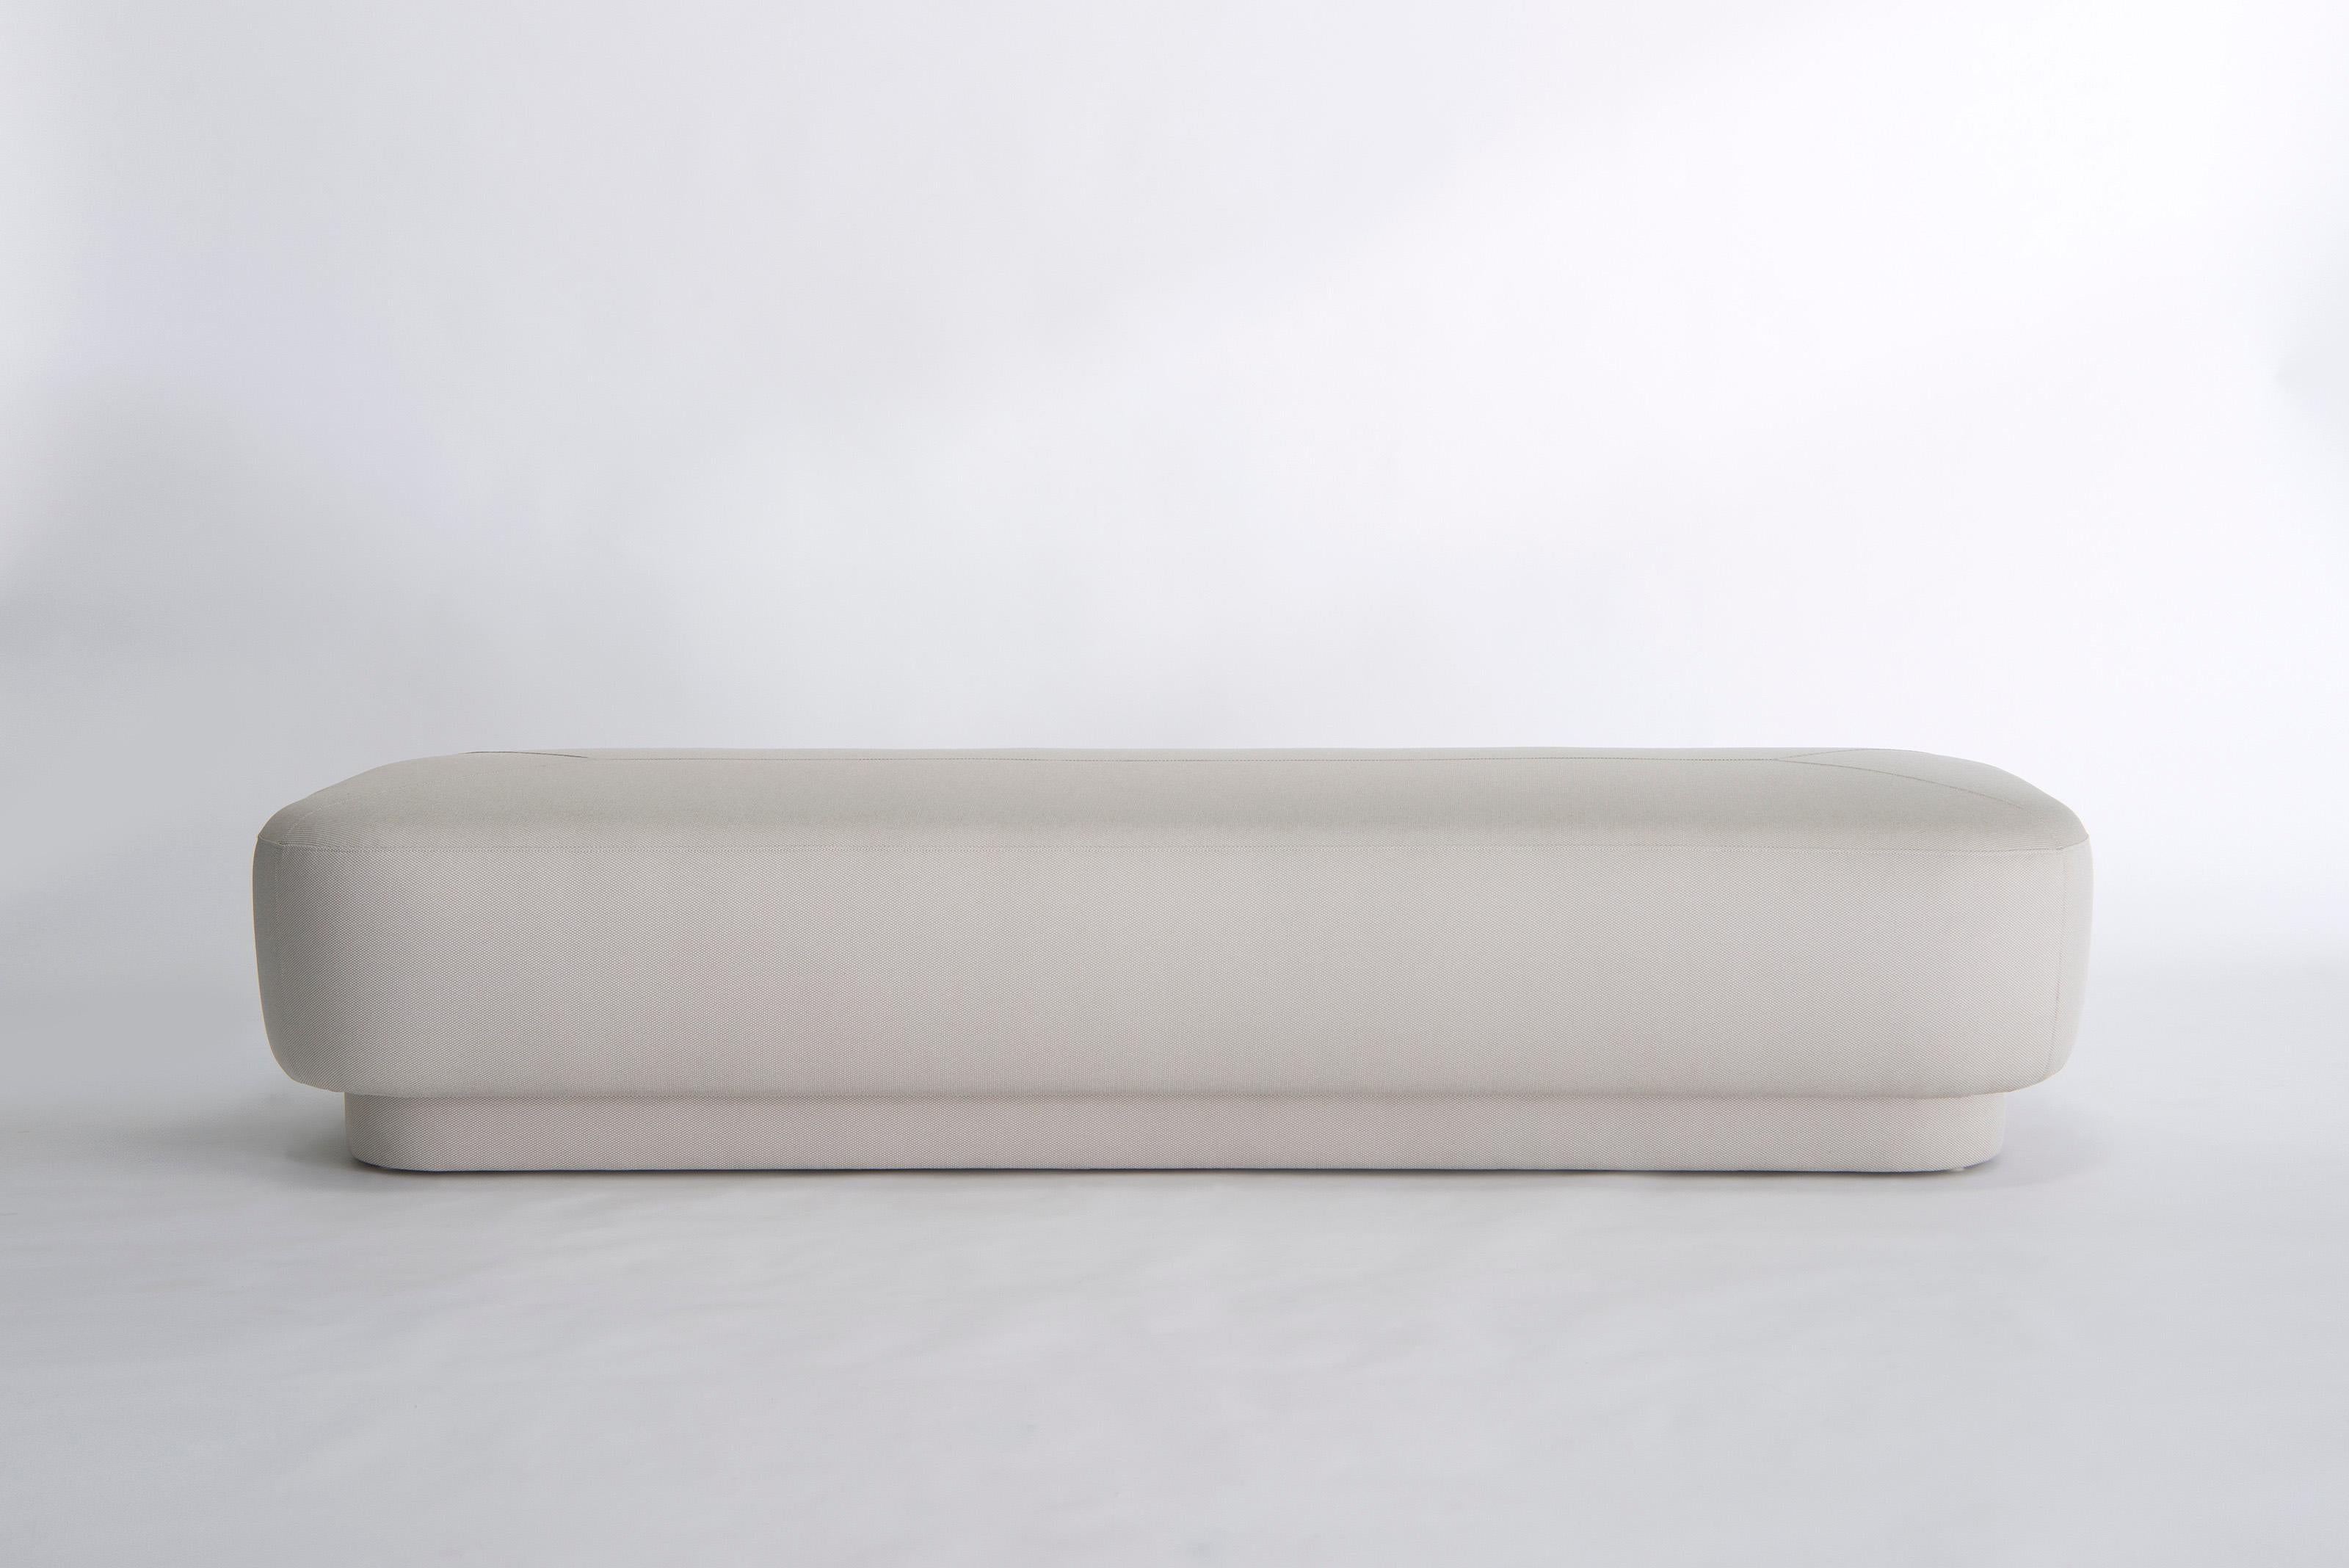 Capper Large Bench by Phase Design
Dimensions: D 71,1 x W 213,4  x H 40,6 cm. 
Materials: Upholstery and wood.

Wood construction with upholstered body. Upholstery may be sourced in Customer Own Material (COM), Customer Own Leather (COL), or in